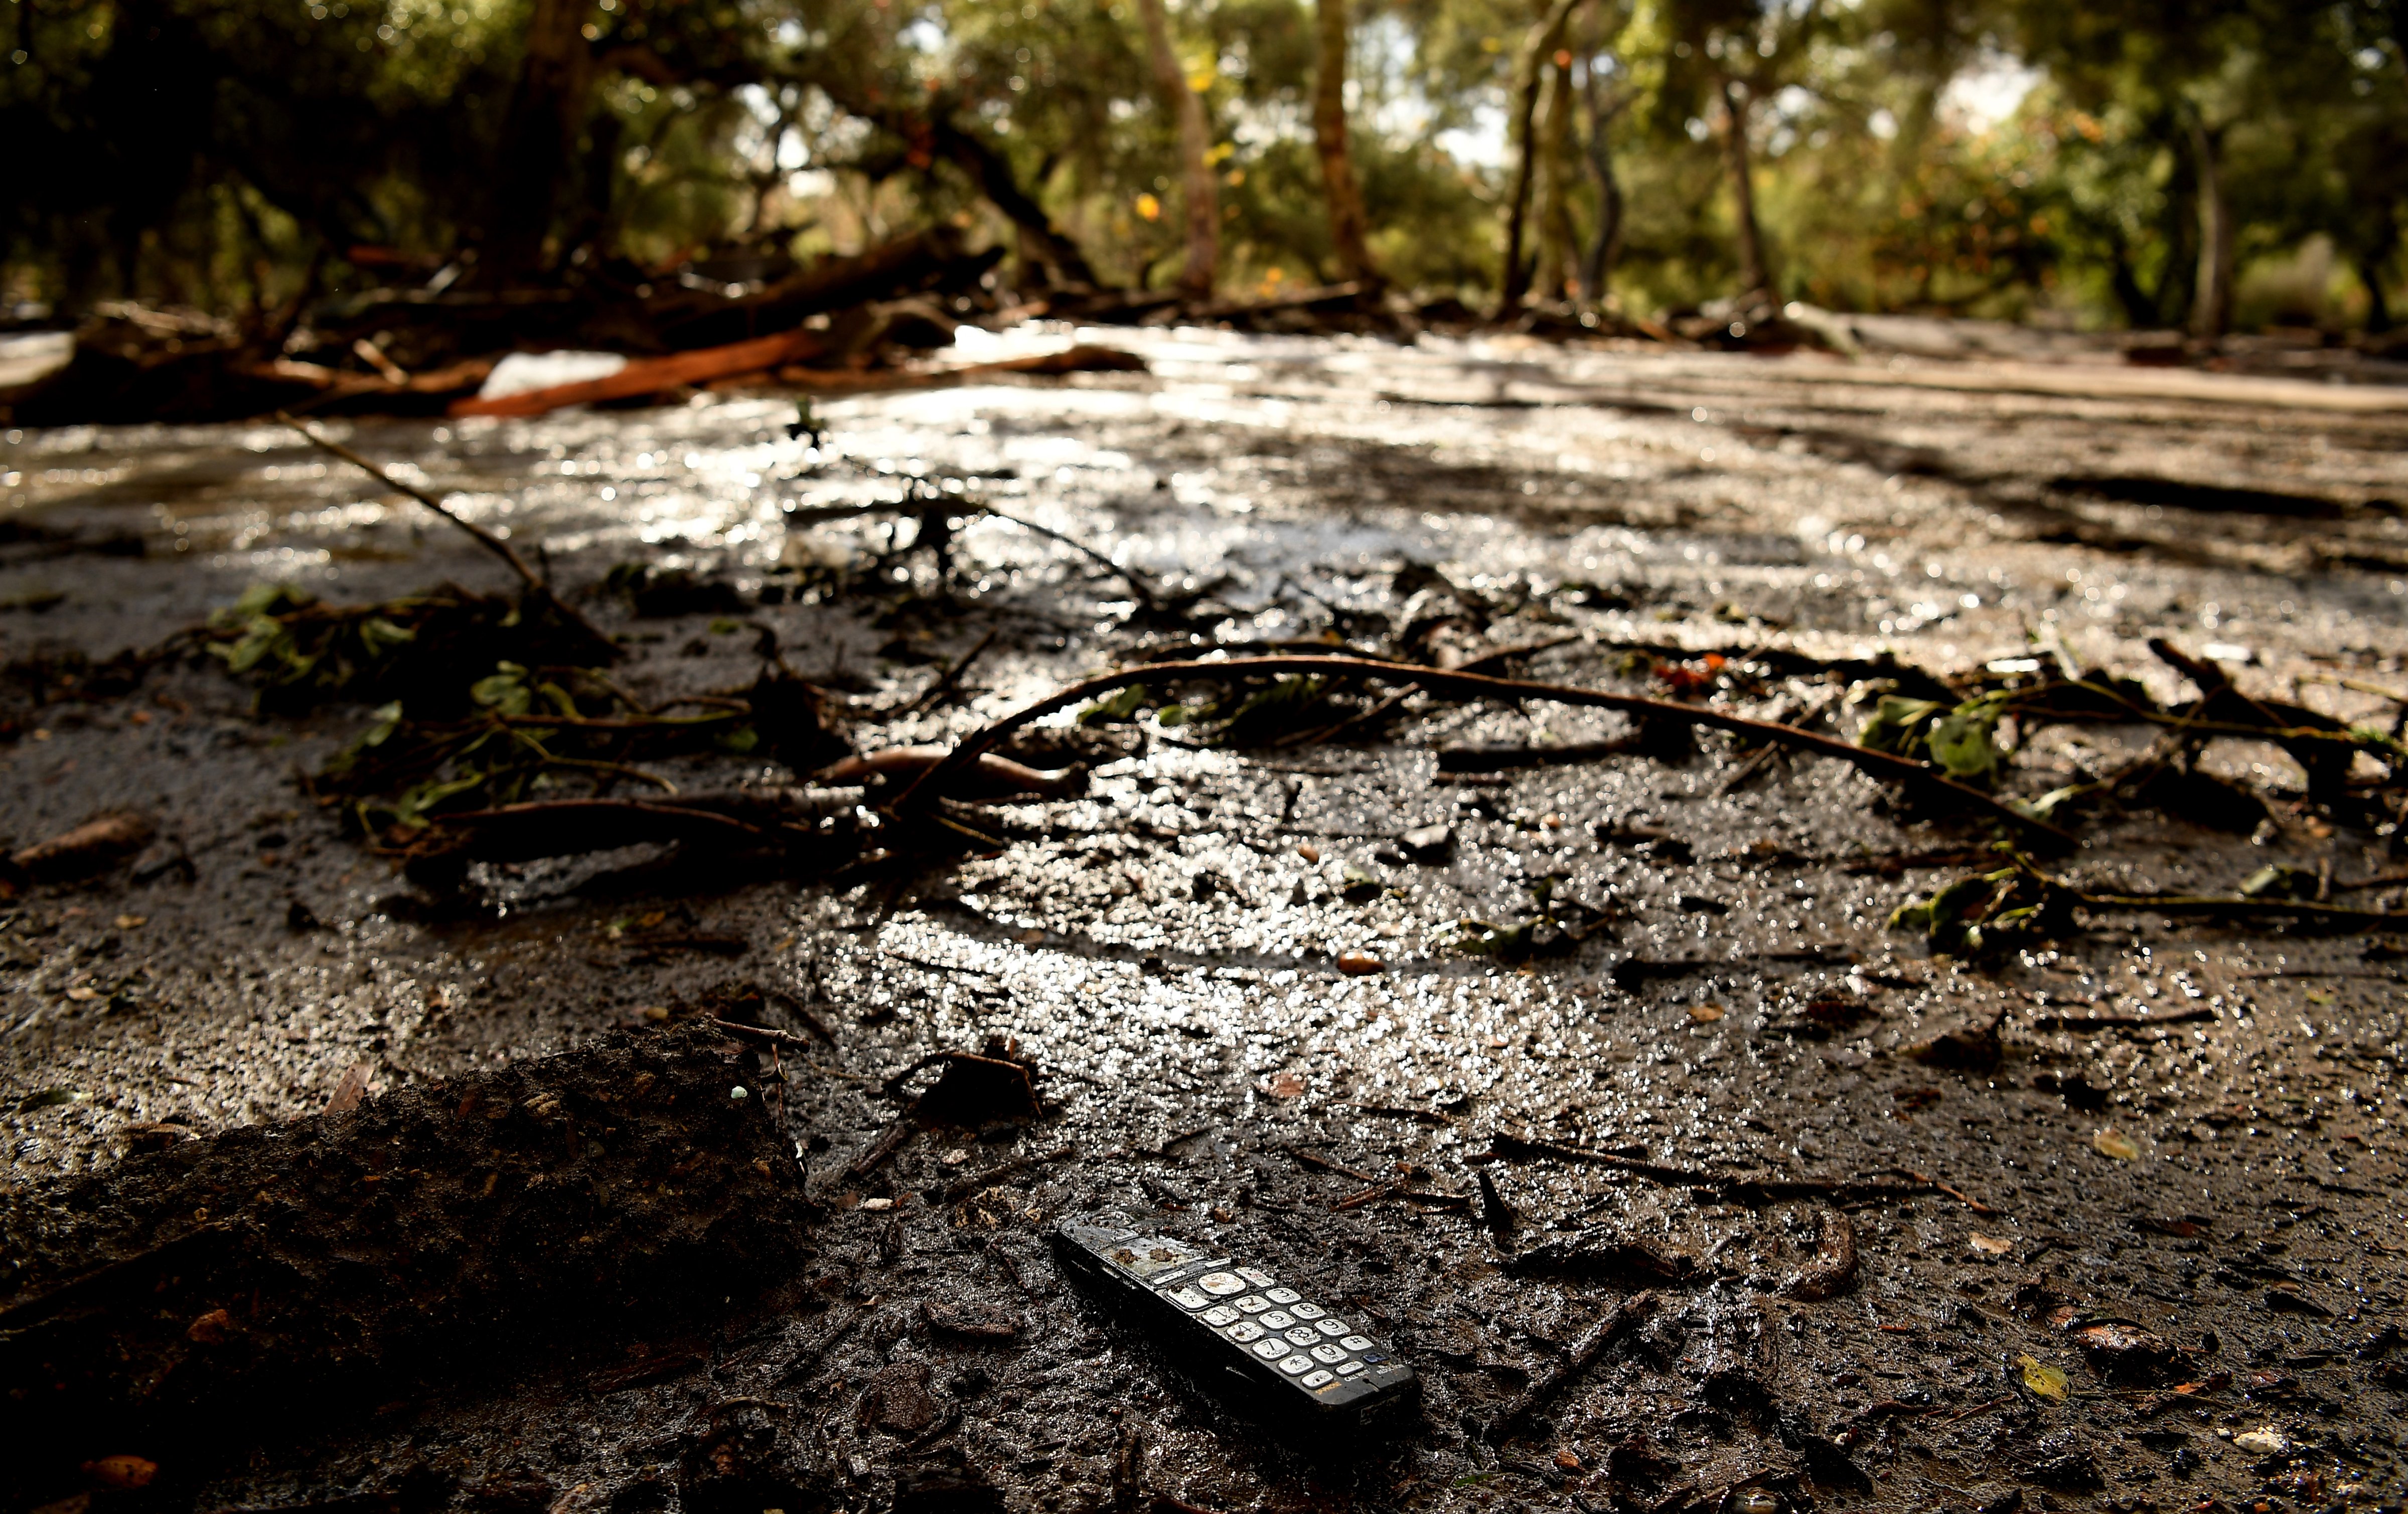 A remote sits in the mud along along Olive Mill Road in Montecito after a major storm hit the burn area January 9, 2018 in Montecito, California. (Wally Skalij—LA Times via Getty Images)